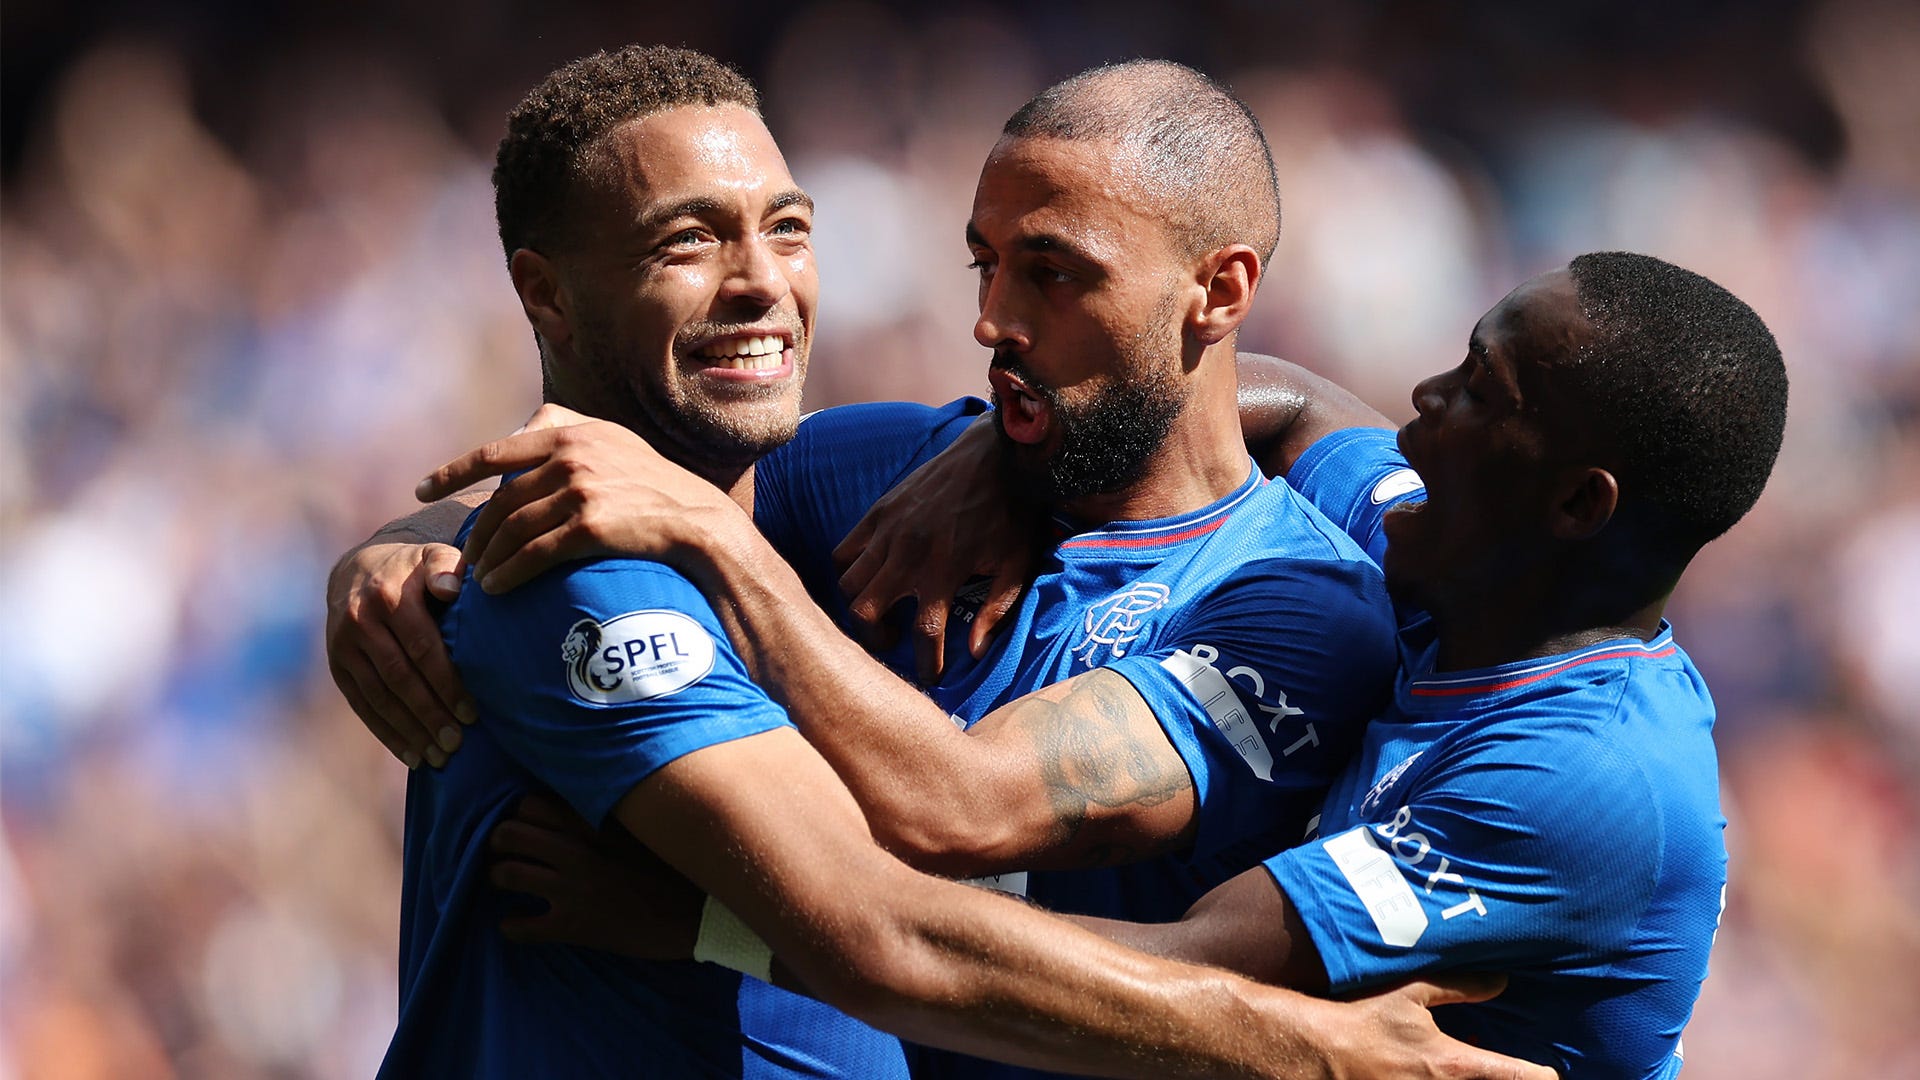 Rangers vs Motherwell Where to watch the match online, live stream, TV channels, and kick-off time Goal US